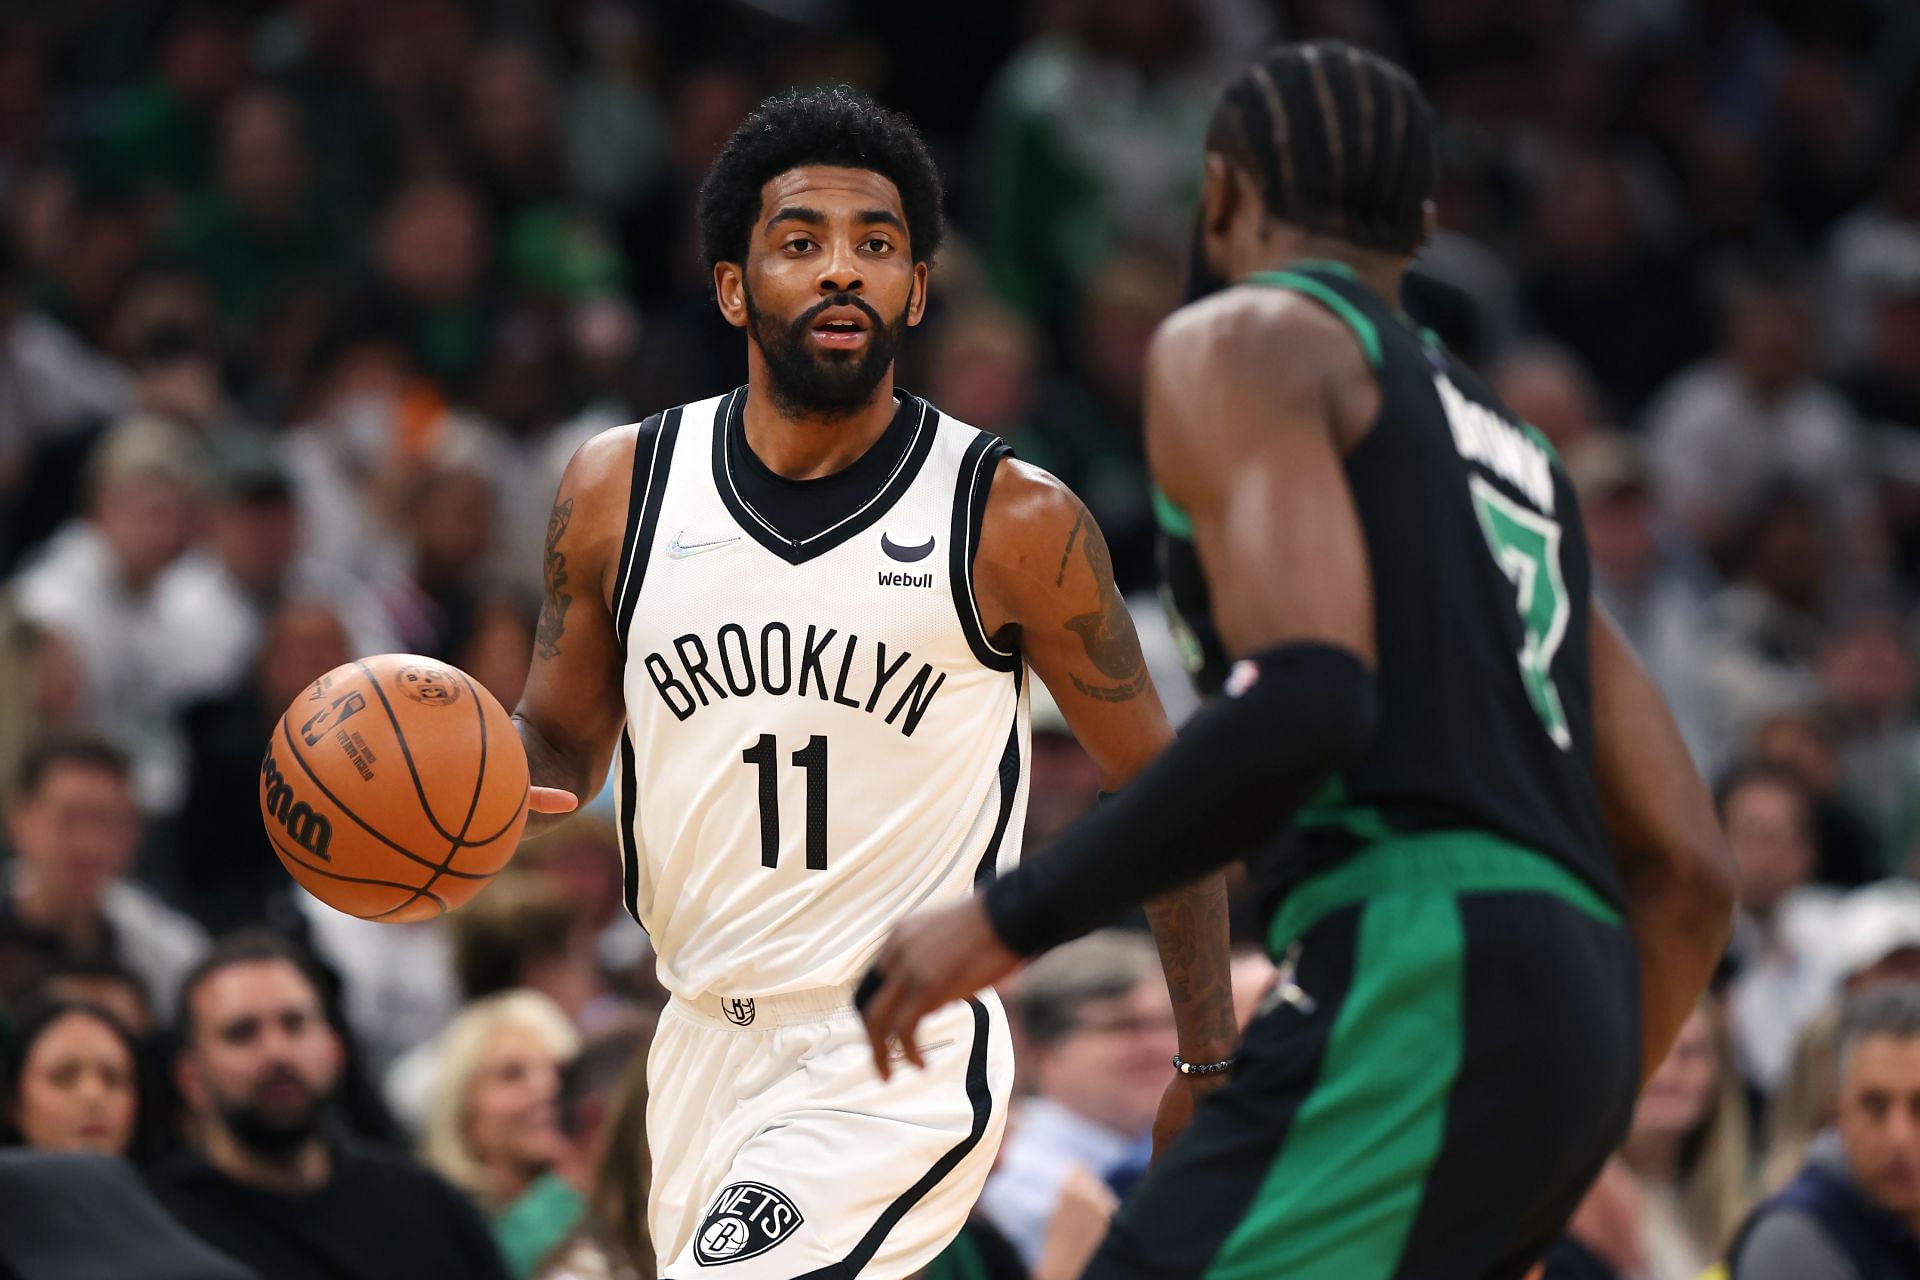 Kyrie Irving spoke about his approach to basketball during a podcast.